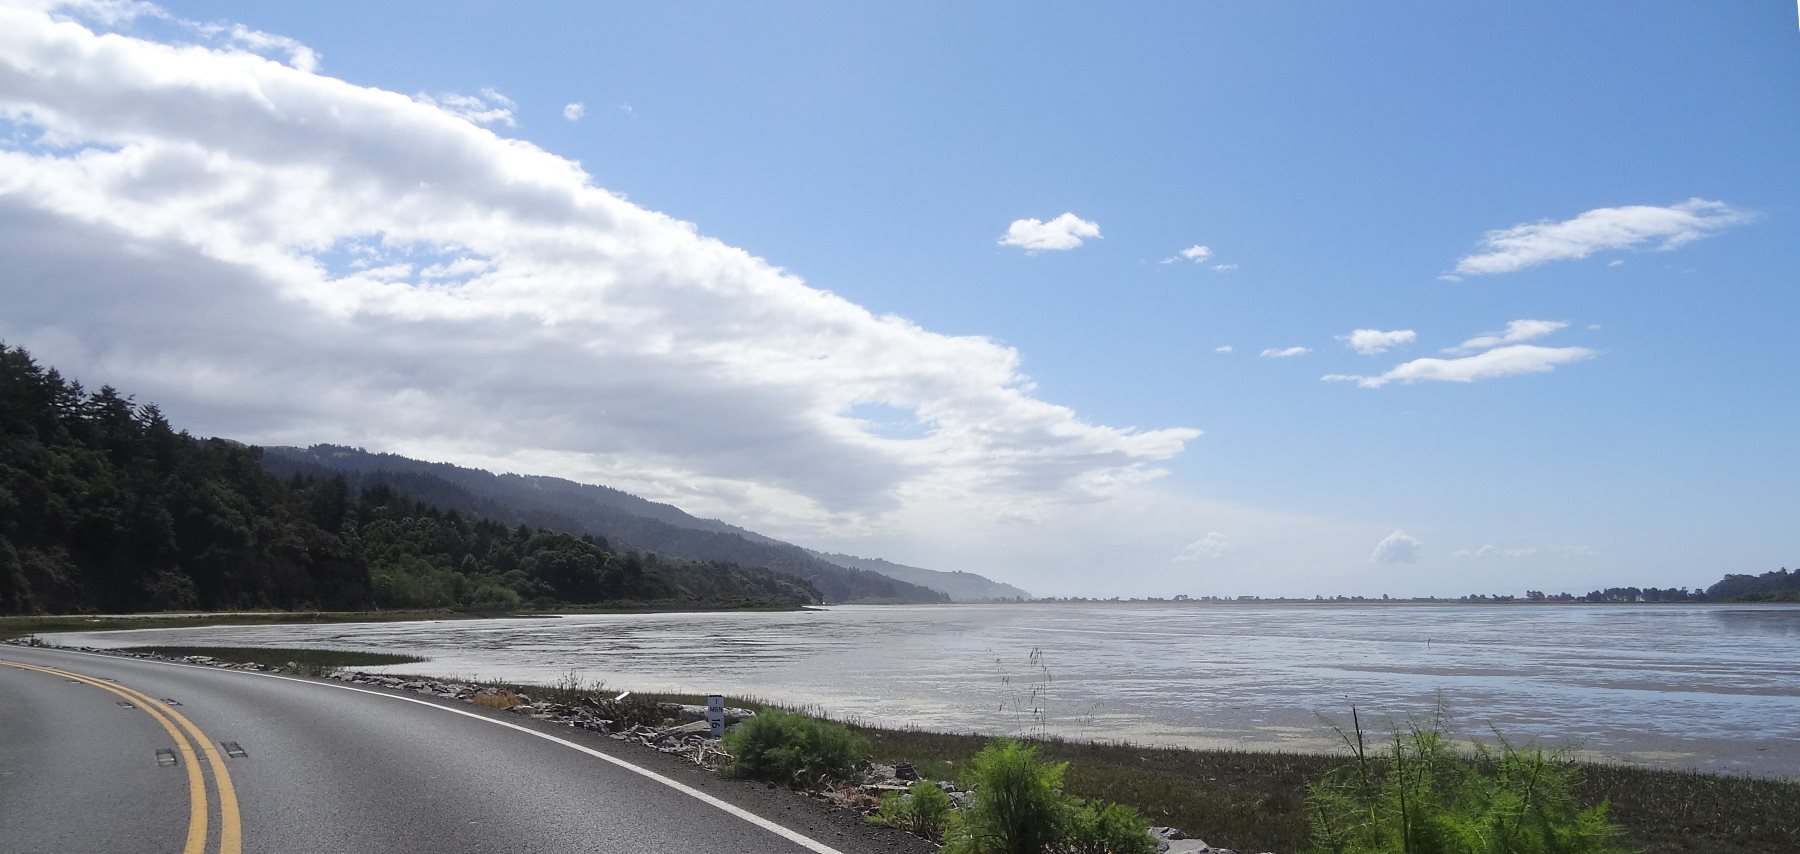 Eventually you reach sea level again at Bolinas Bay. The autobahn Society has purchased much of the land here, because it supports huge populations of sea and shore birds.